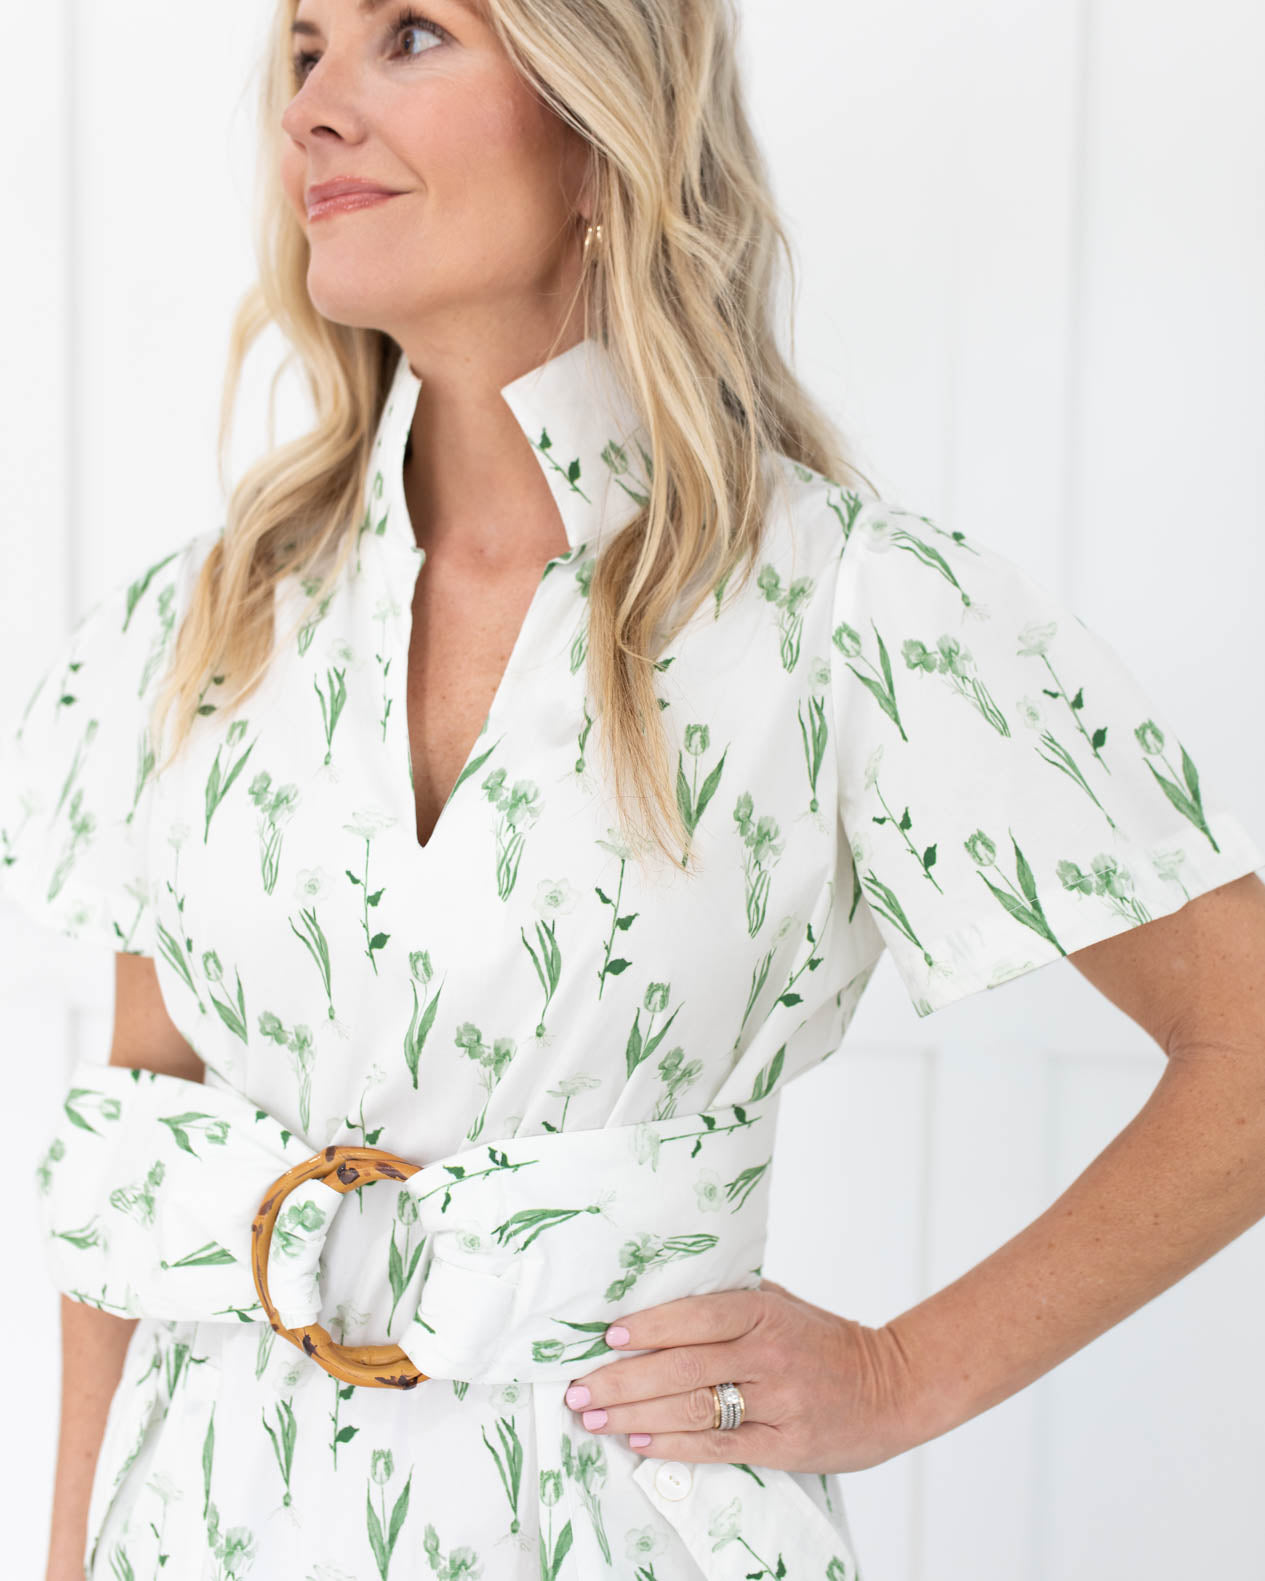 Green and White Floral Midi Dress with V Front Collar, Pockets and Belt